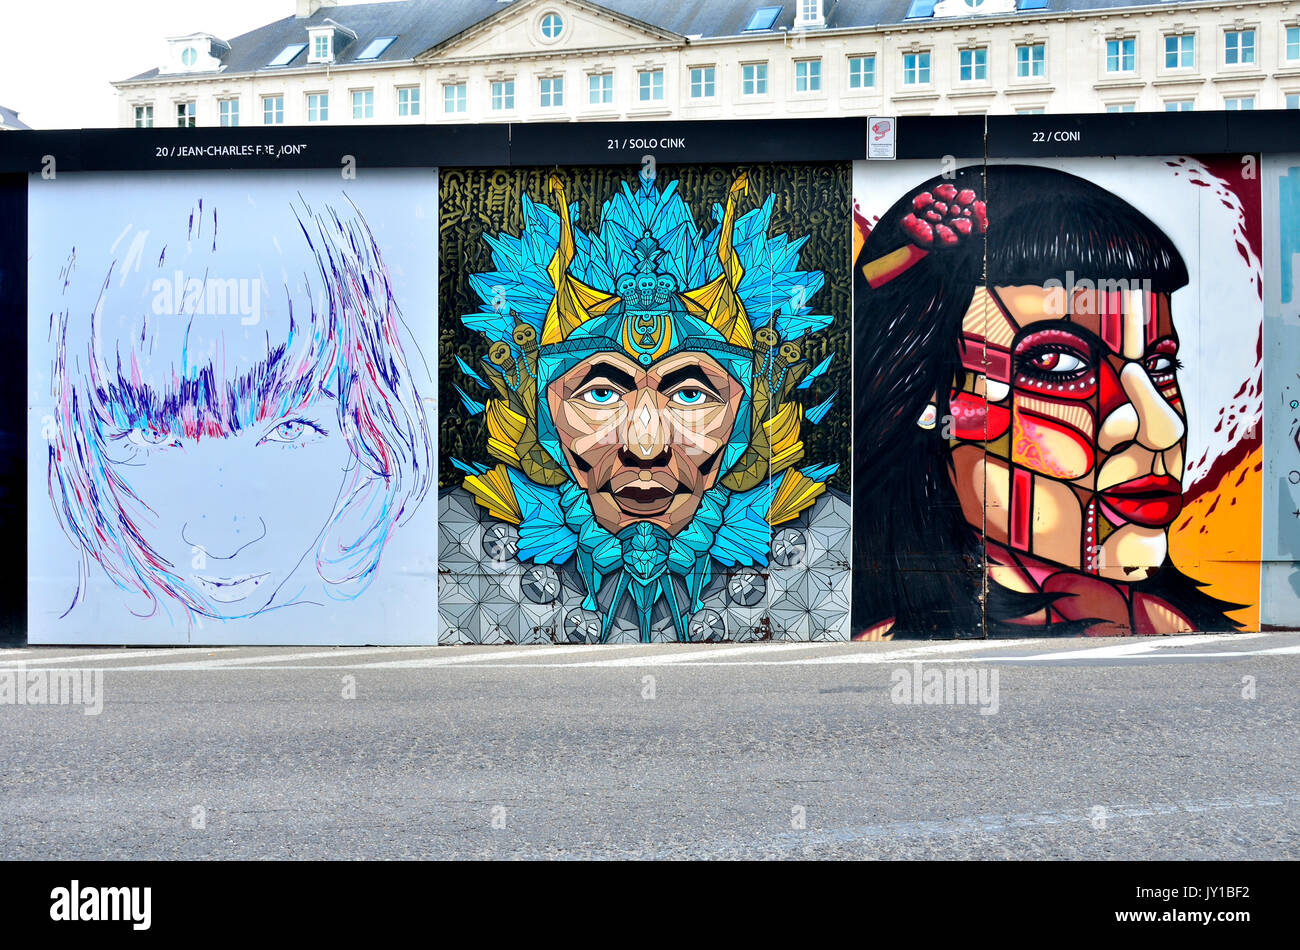 Brussels, Belgium. Street art in Rue Ravenstein - 'Interfaces': 40 portraits by 40 artists on temporary walls around building works. Initiative by ... Stock Photo